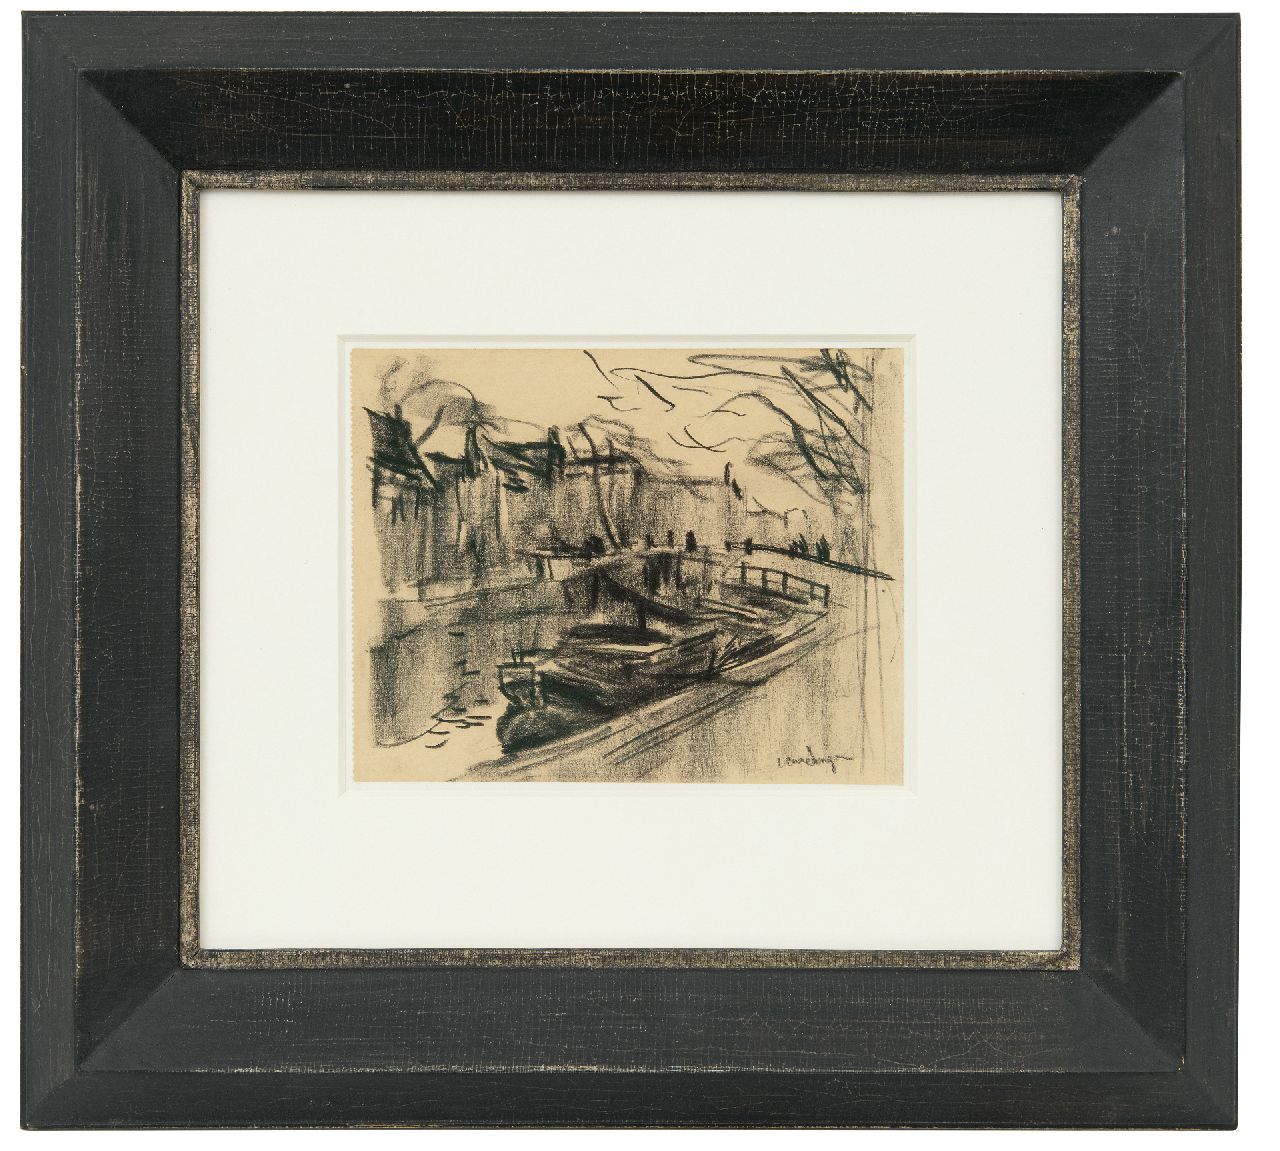 Dongen C.T.M. van | Cornelis Theodorus Maria 'Kees' van Dongen | Watercolours and drawings offered for sale | Delfshaven, The Netherlands, charcoal on paper 12.1 x 15.4 cm, signed l.r.